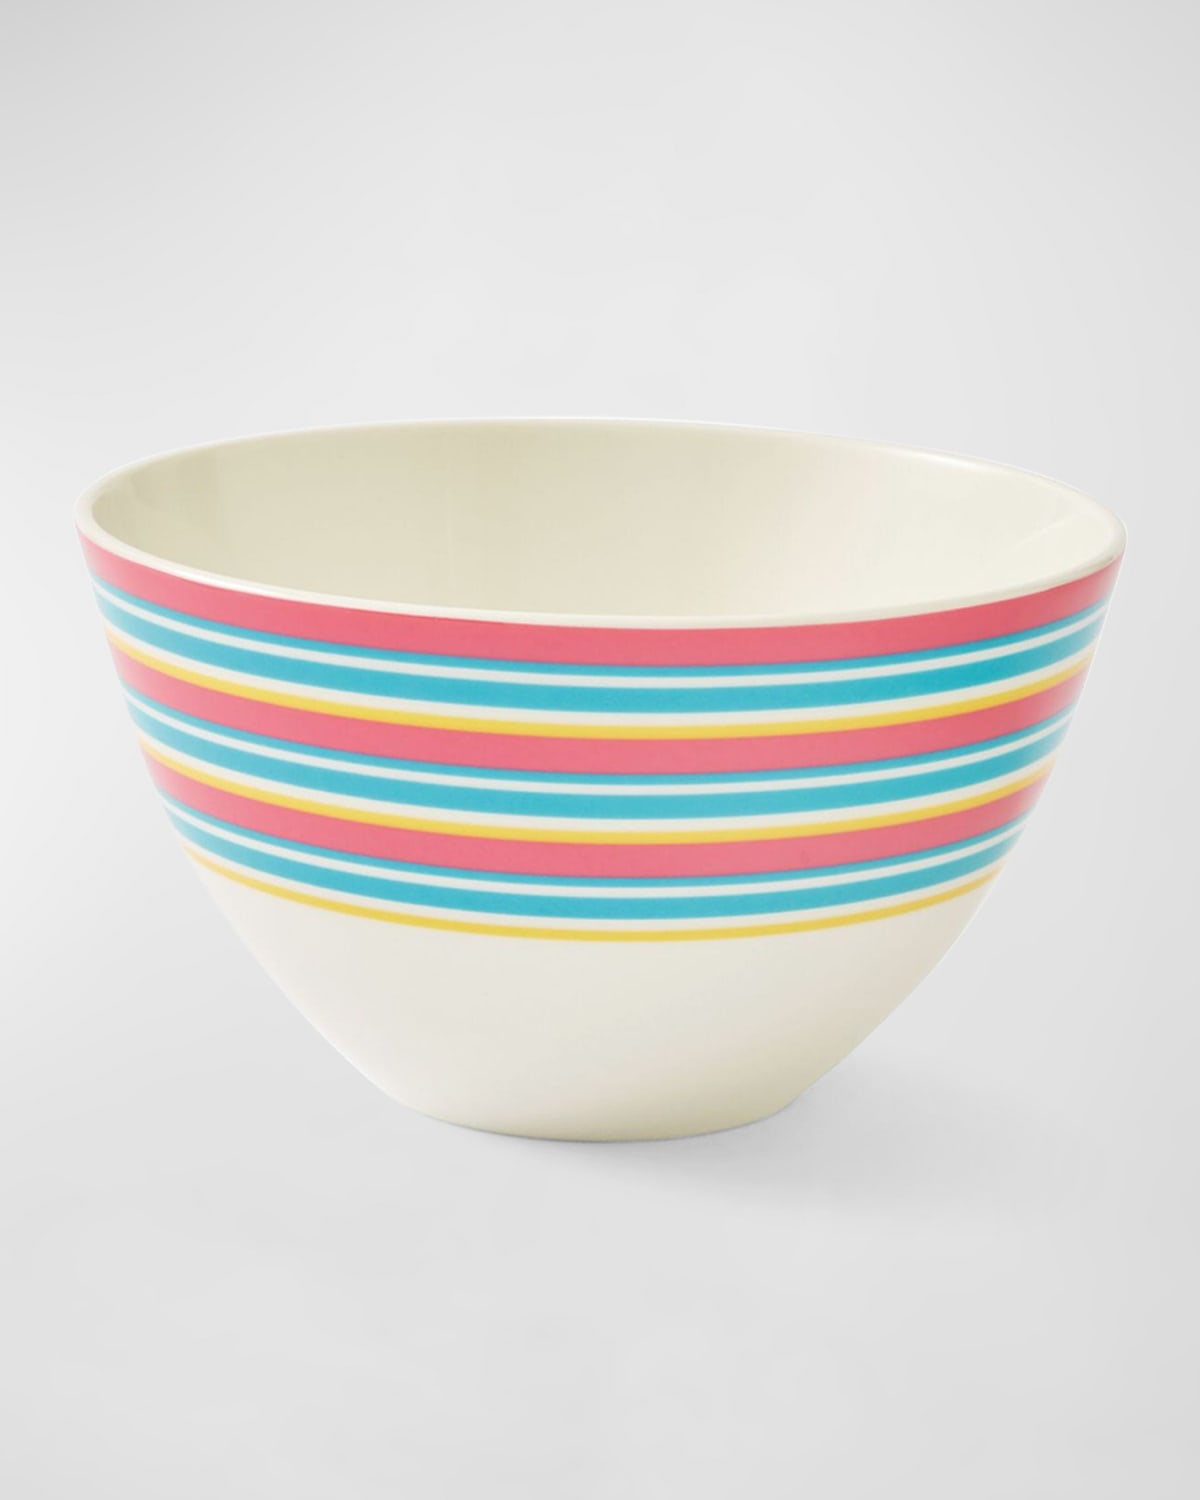 Kit Kemp For Spode Calypso Stripe Bowls, Set Of 4 In Assorted